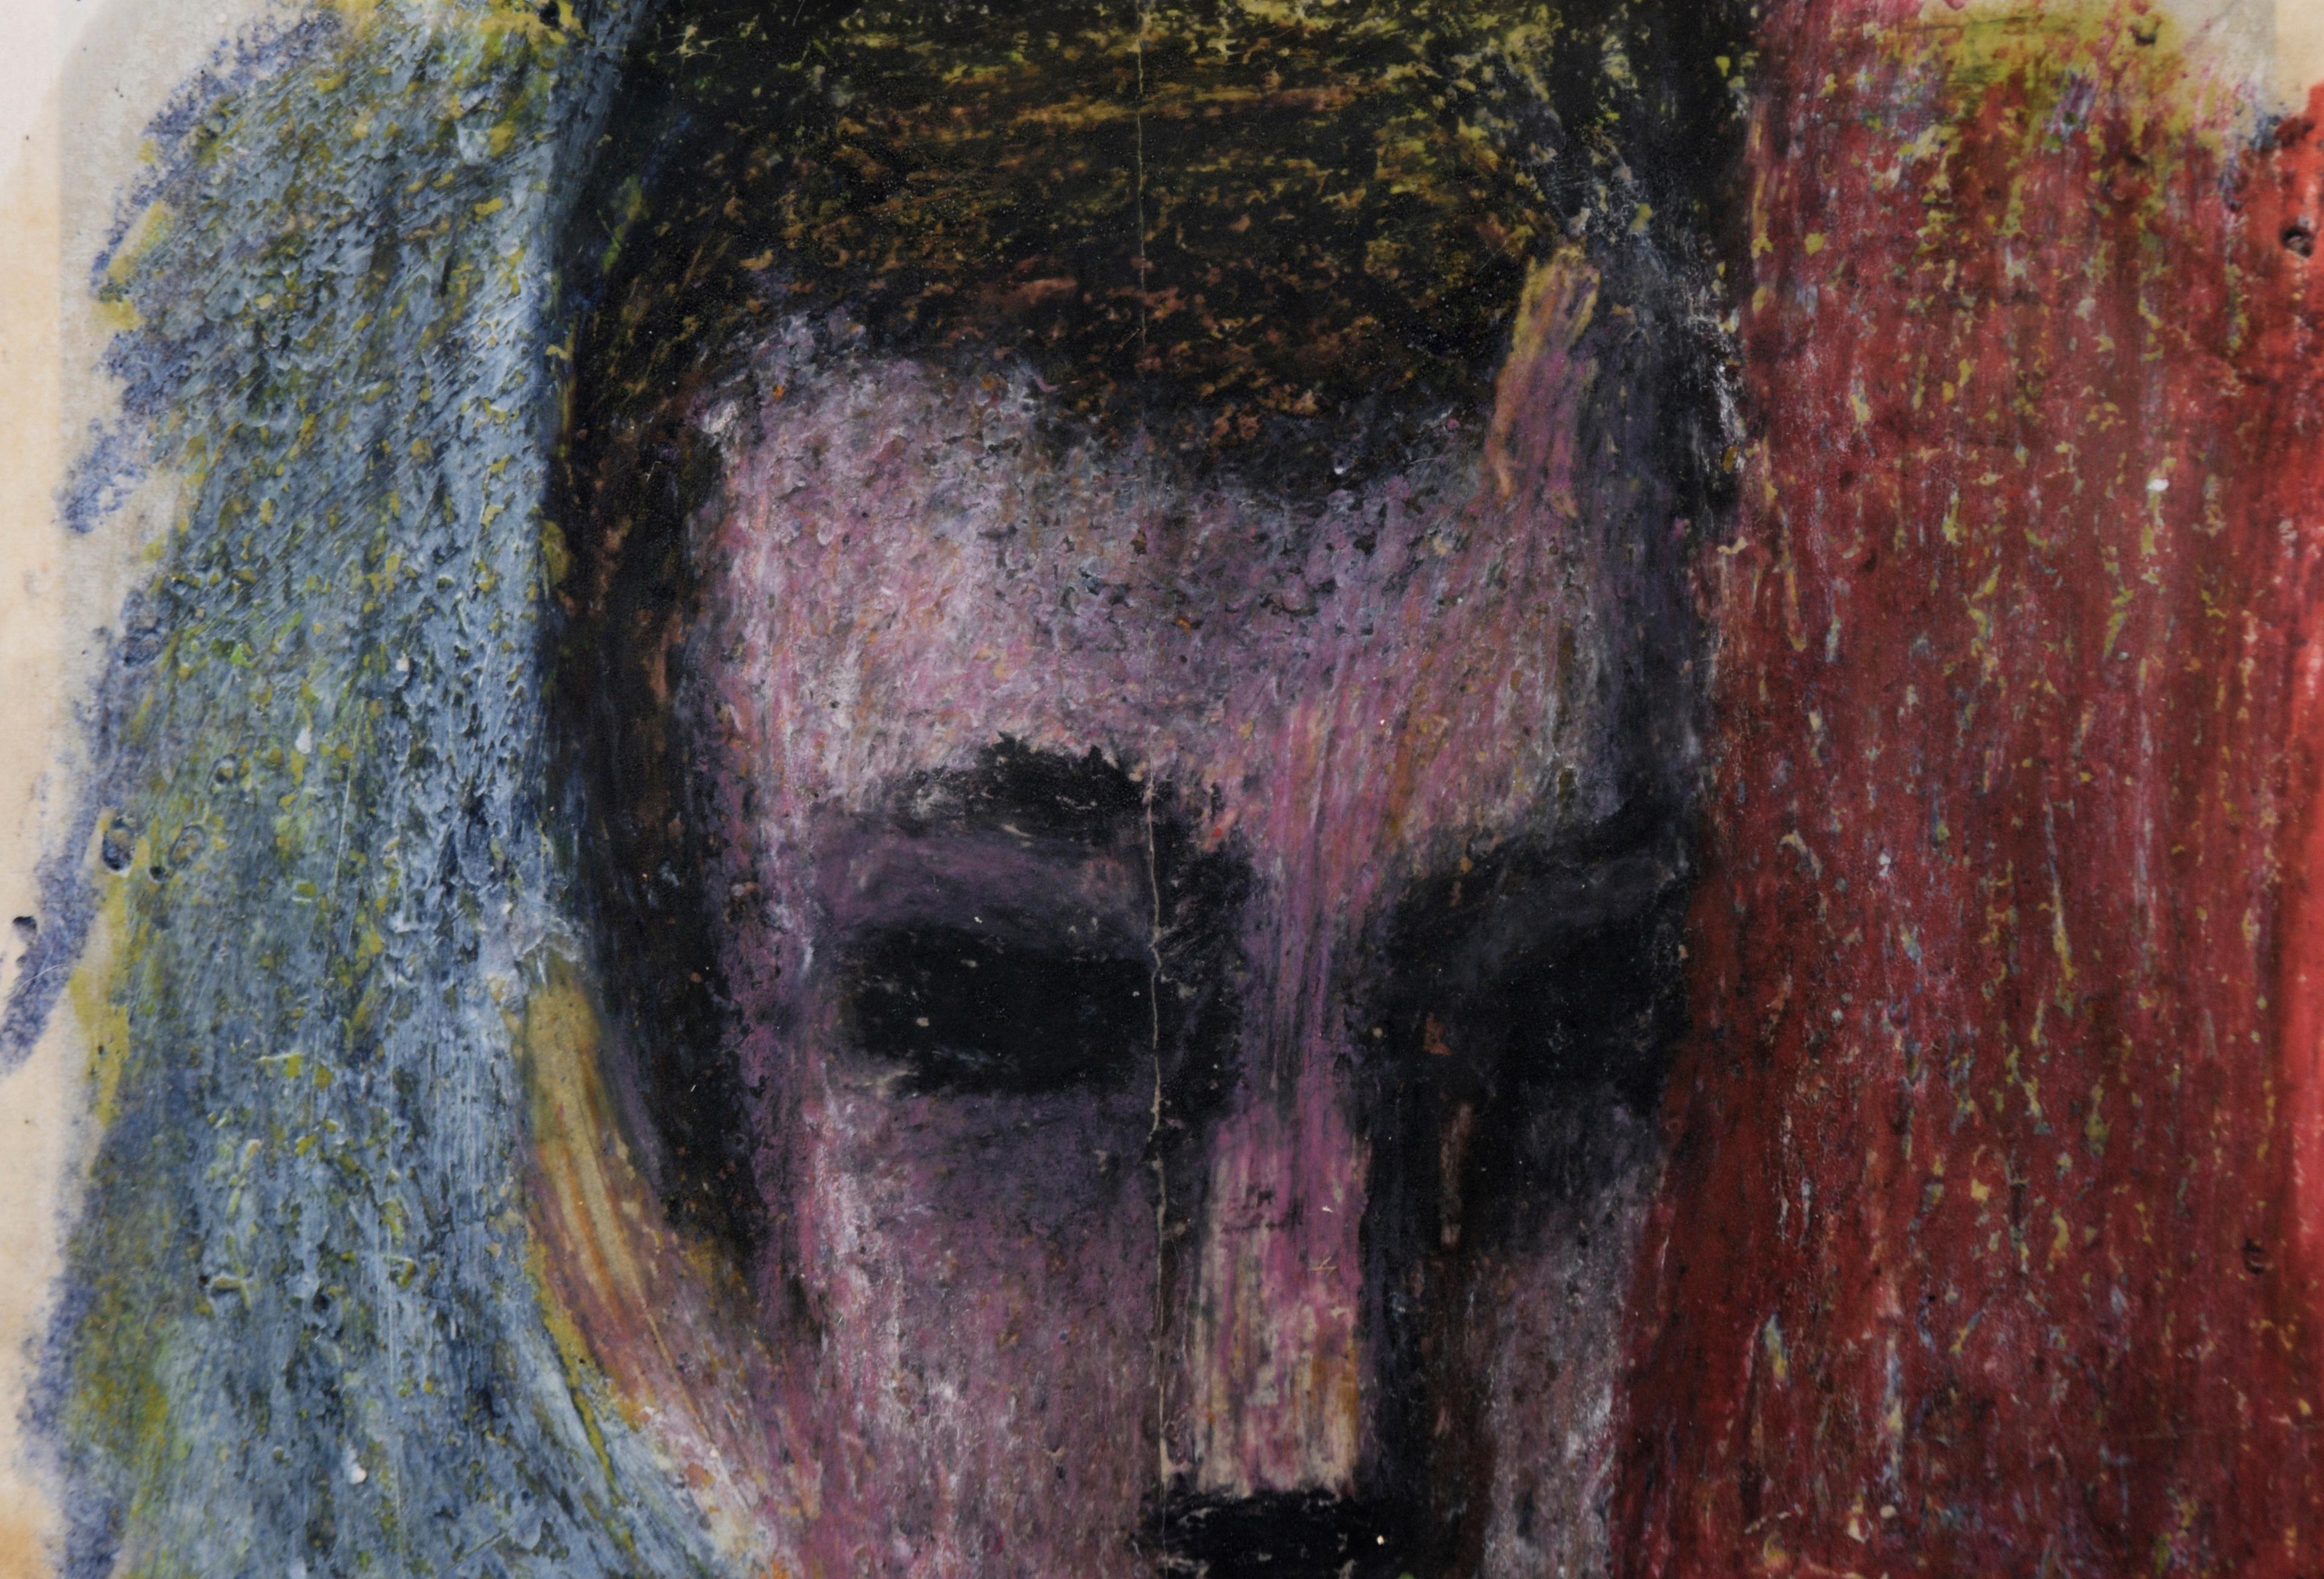 Expressionist Portrait of a Man in a Suit in Pastel on Paper

Moody portrait of a man with dark hair by an unknown artist (20th Century). The man is shown with an elongated face and dark, deep-set eyes. He is wearing a dark suit and tie, with a